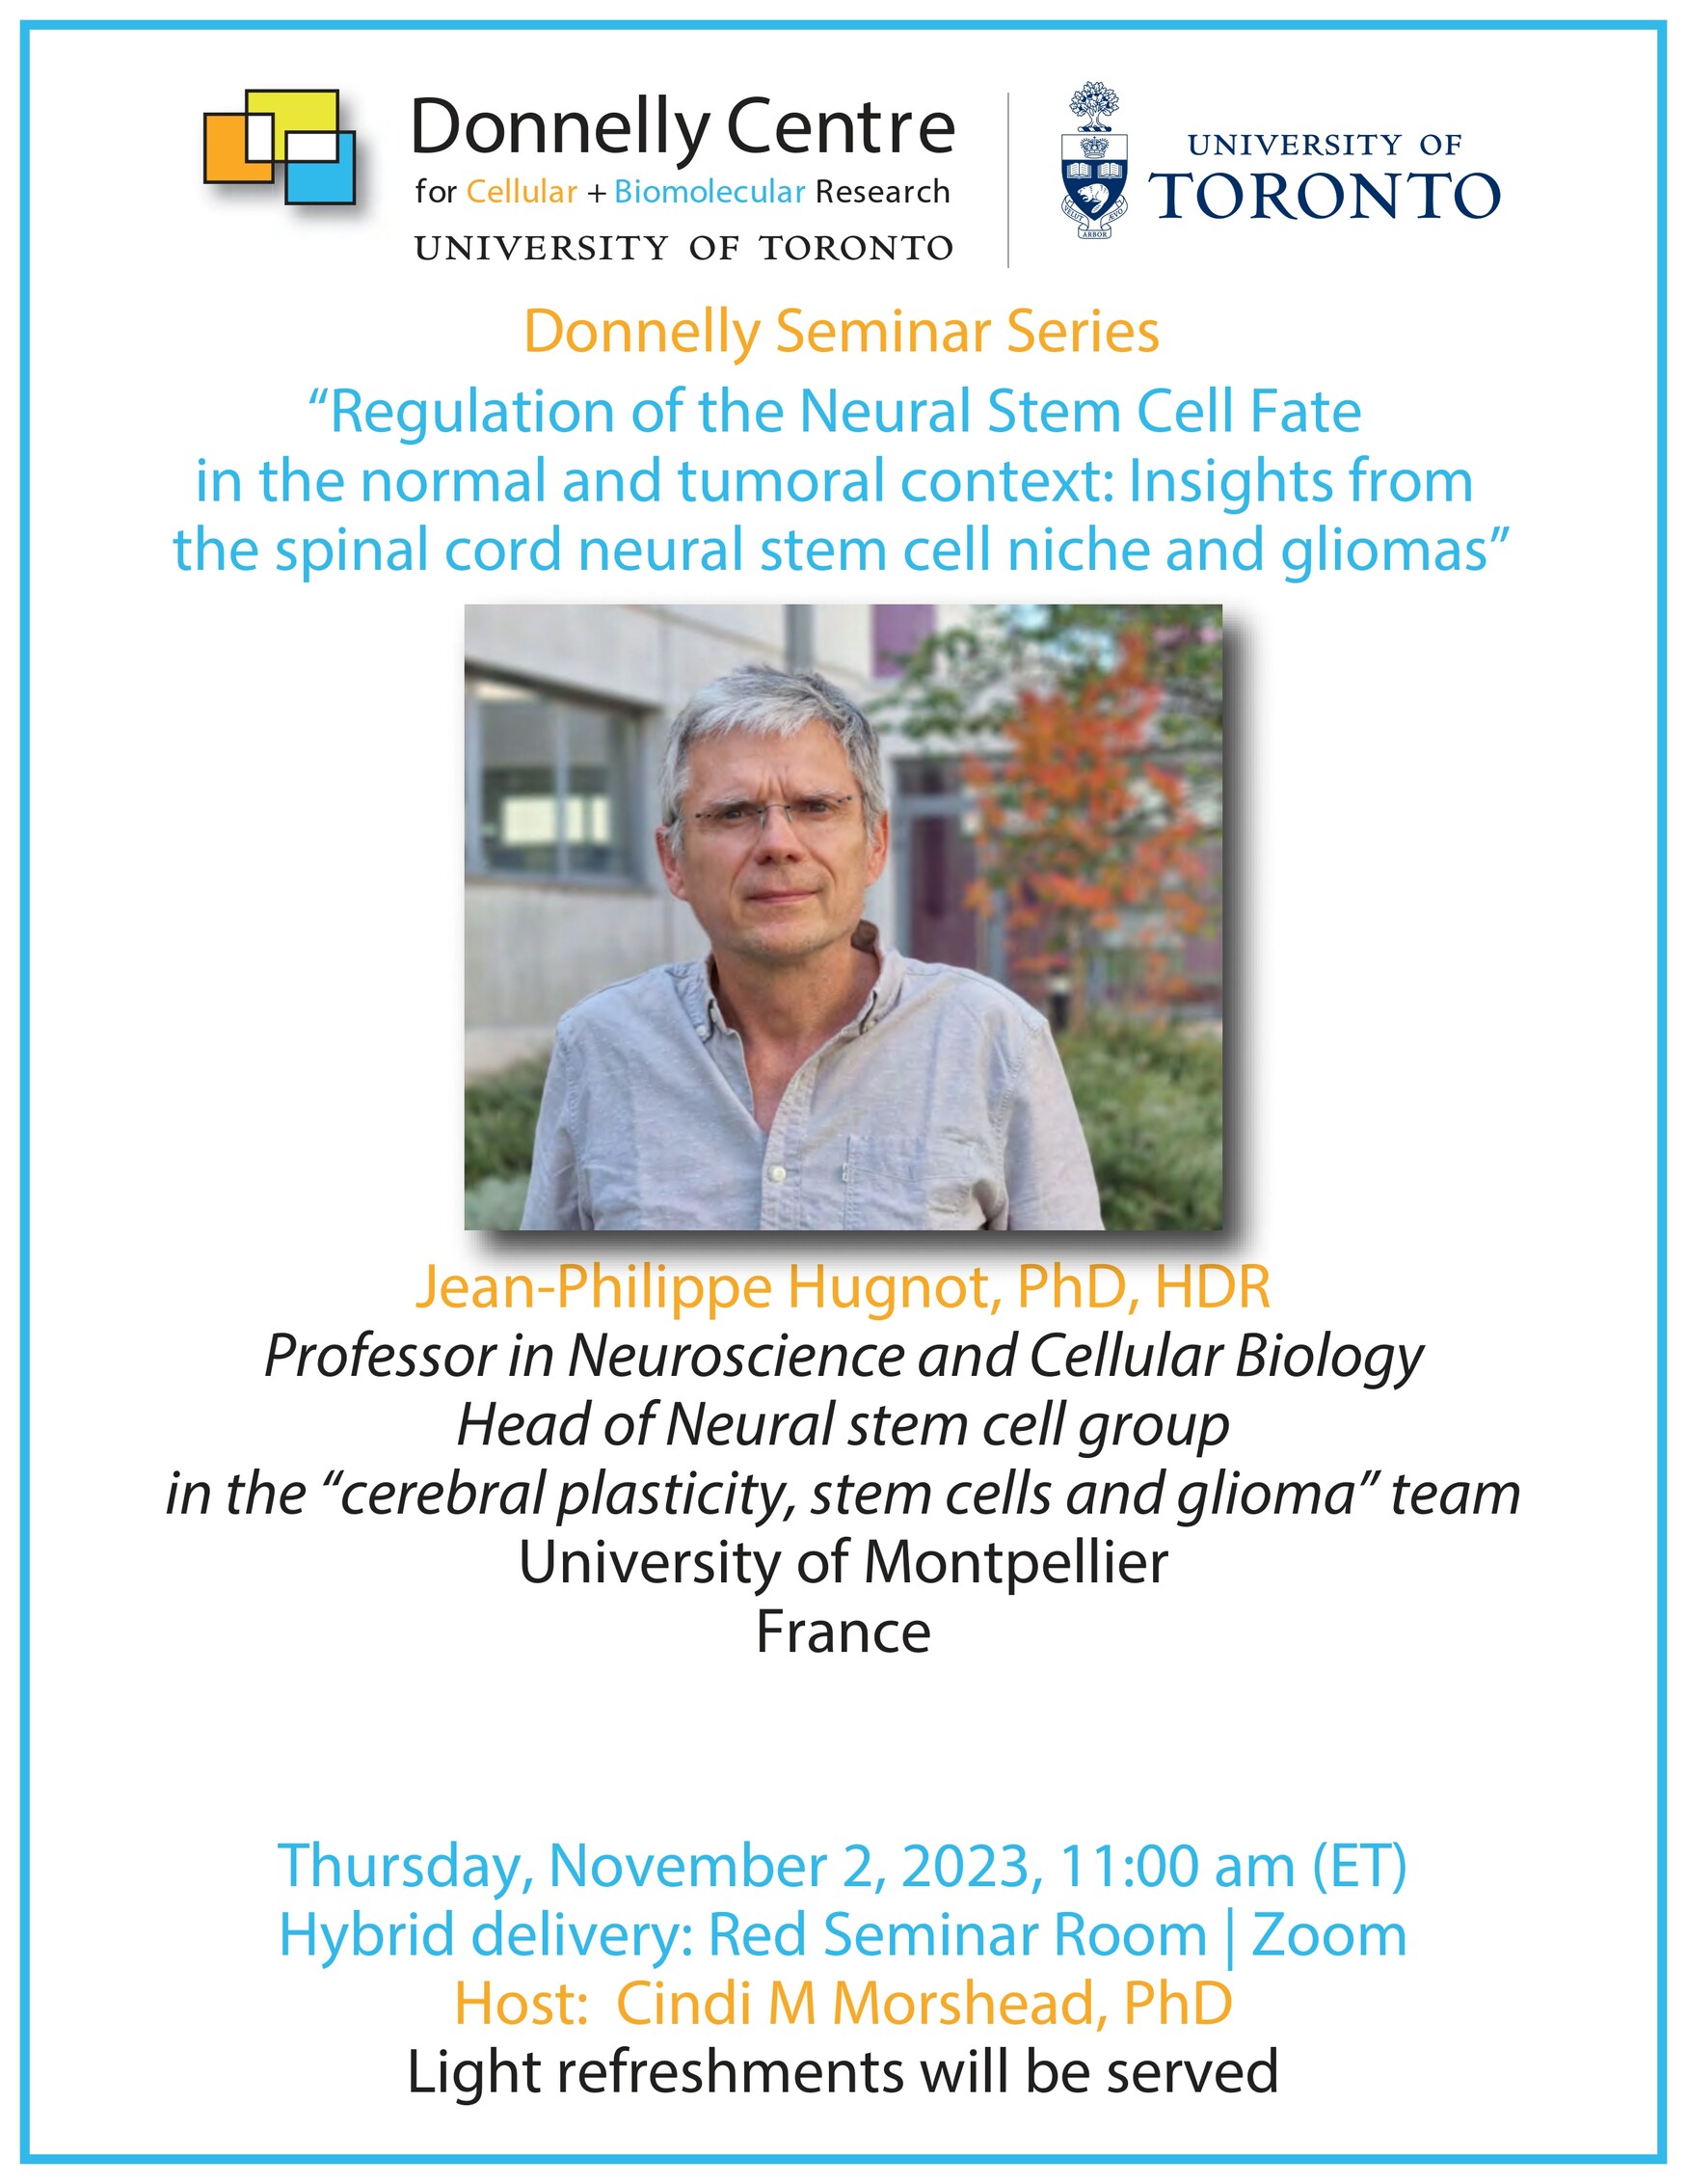 Poster for Donnelly Centre Seminar on "Regulation of the Neural Stem Cell Fate in the normal and tumoral context"